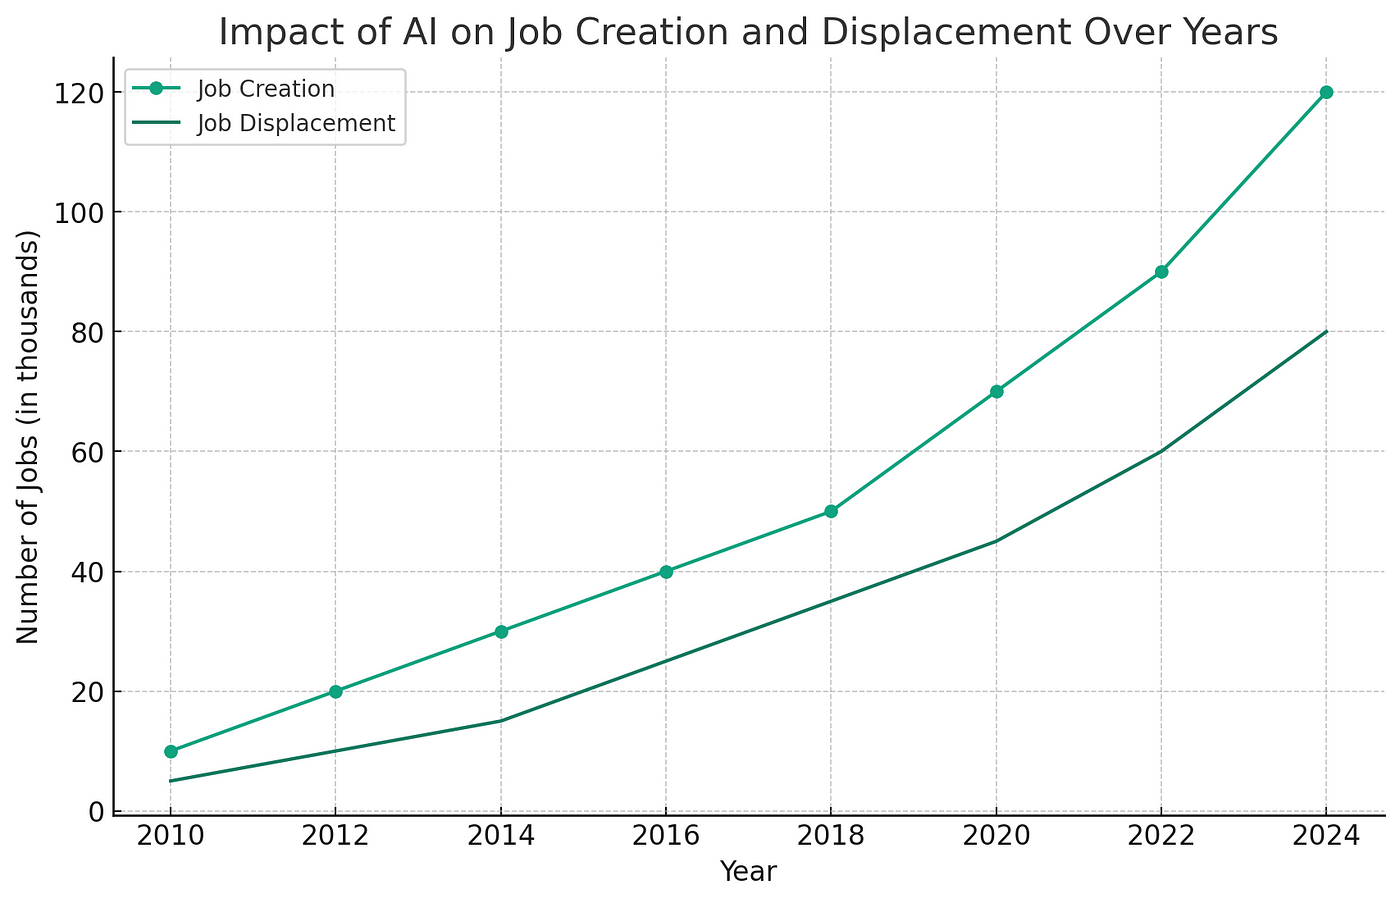 A line graph displaying the impact of artificial intelligence on job creation and displacement from 2010 to 2024. Two lines show the trends: job creation (rising from 10,000 to 120,000) and job displacement (increasing from 5,000 to 80,000), both measured in thousands of jobs. The graph illustrates a consistent increase over the years in both the creation and displacement of jobs due to AI advancements.